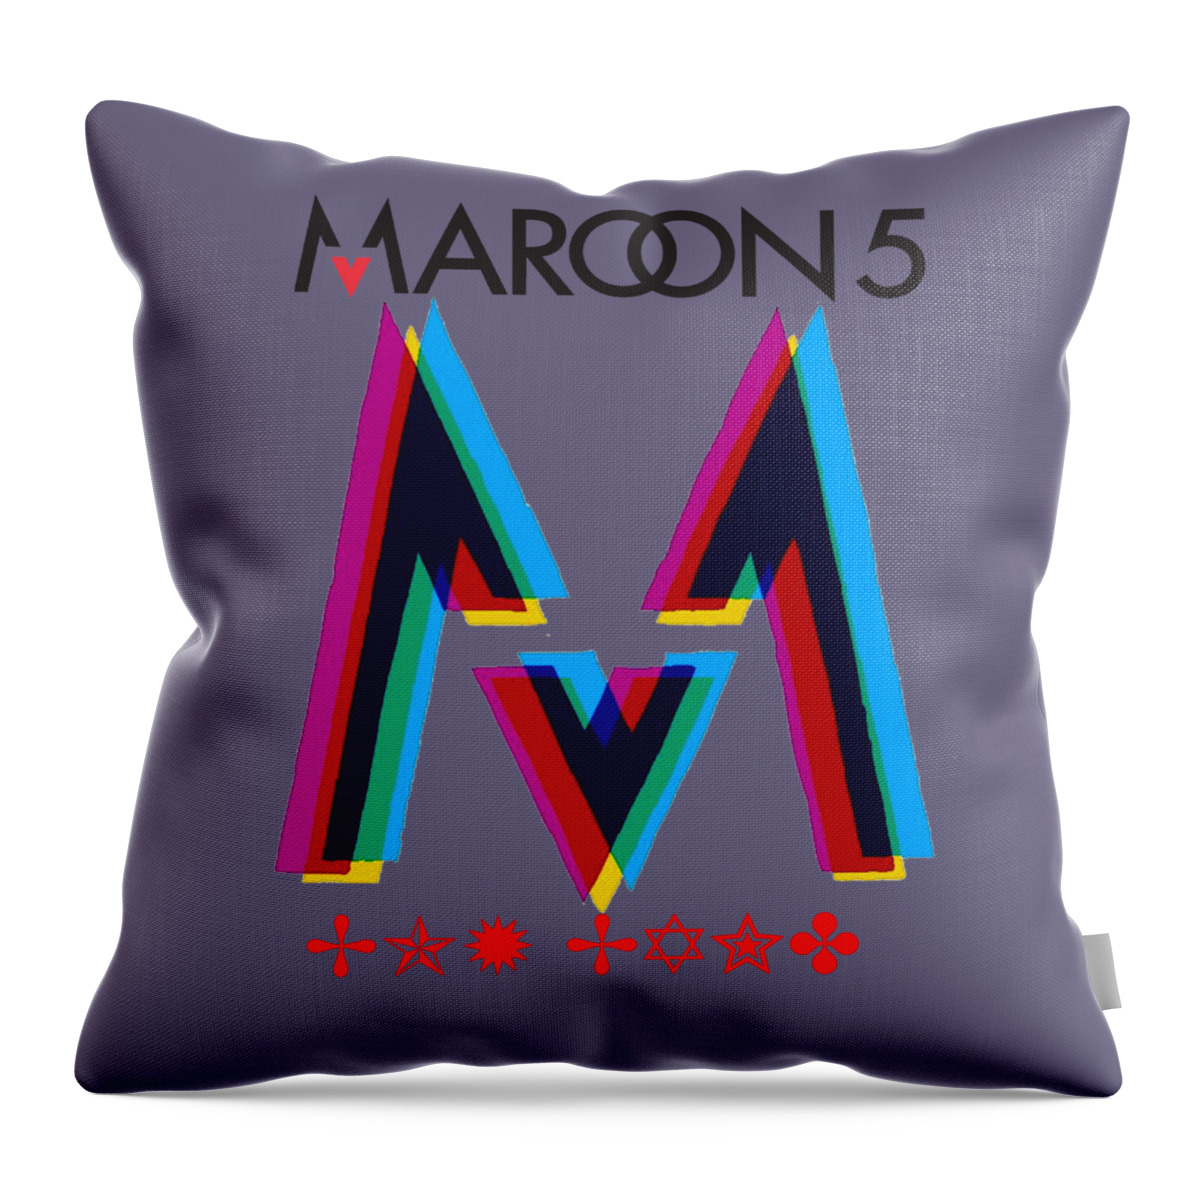 Maroon 5 Throw Pillow featuring the drawing Maroon 5 by Edi Alhamdulilah